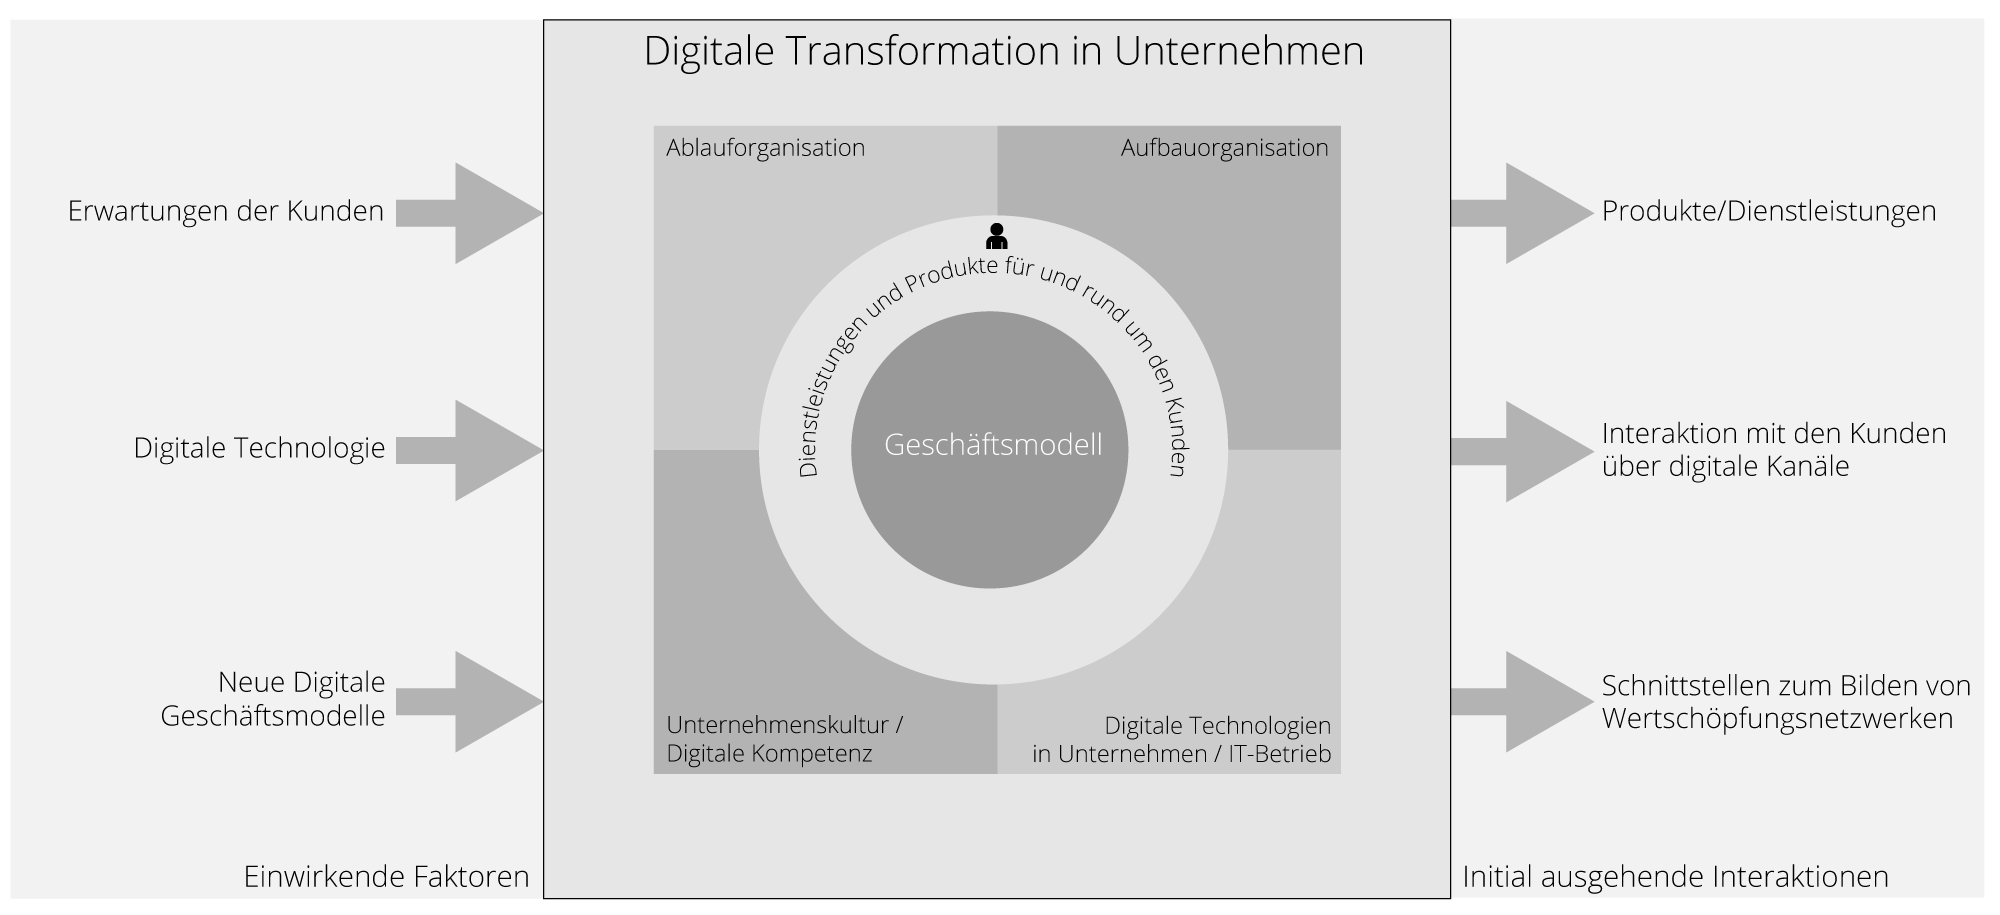 Die digitale Transformation in UnternehmenBy Thomas Kofler CC BY SA 4.0 from Wikimedia Commons